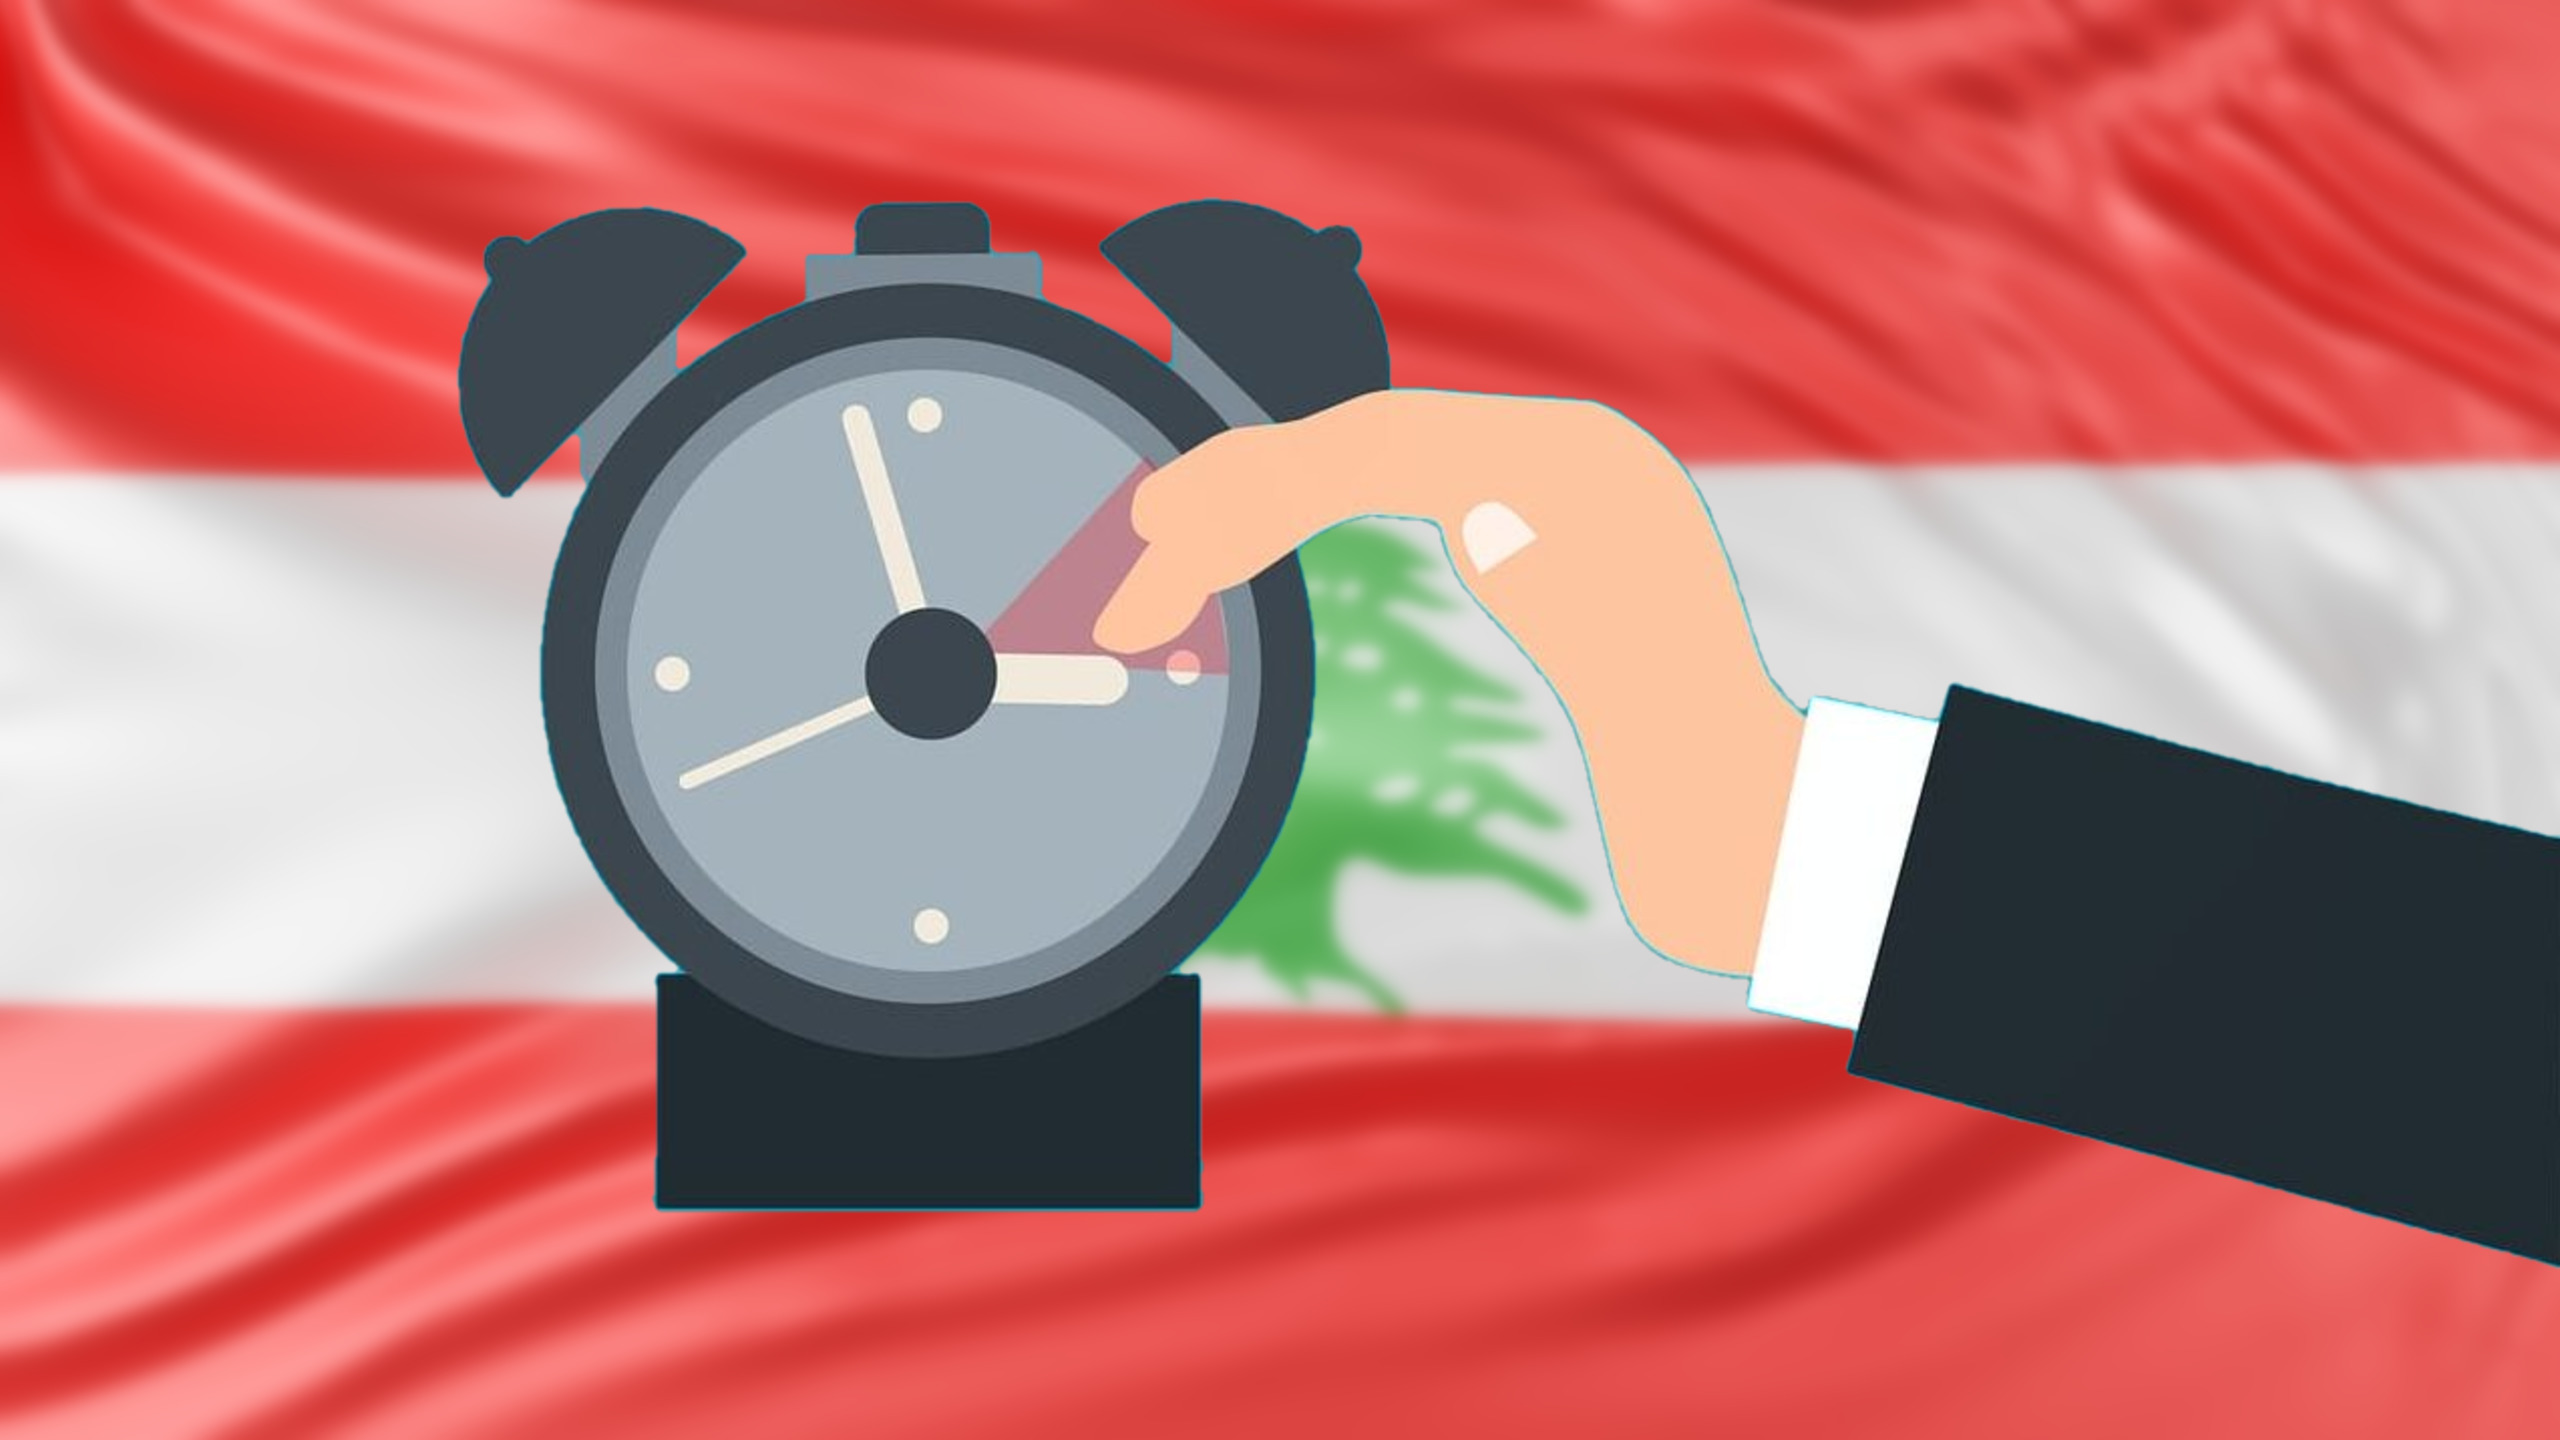 Lebanon’s Parliament Votes To Move to Daylight Saving Time